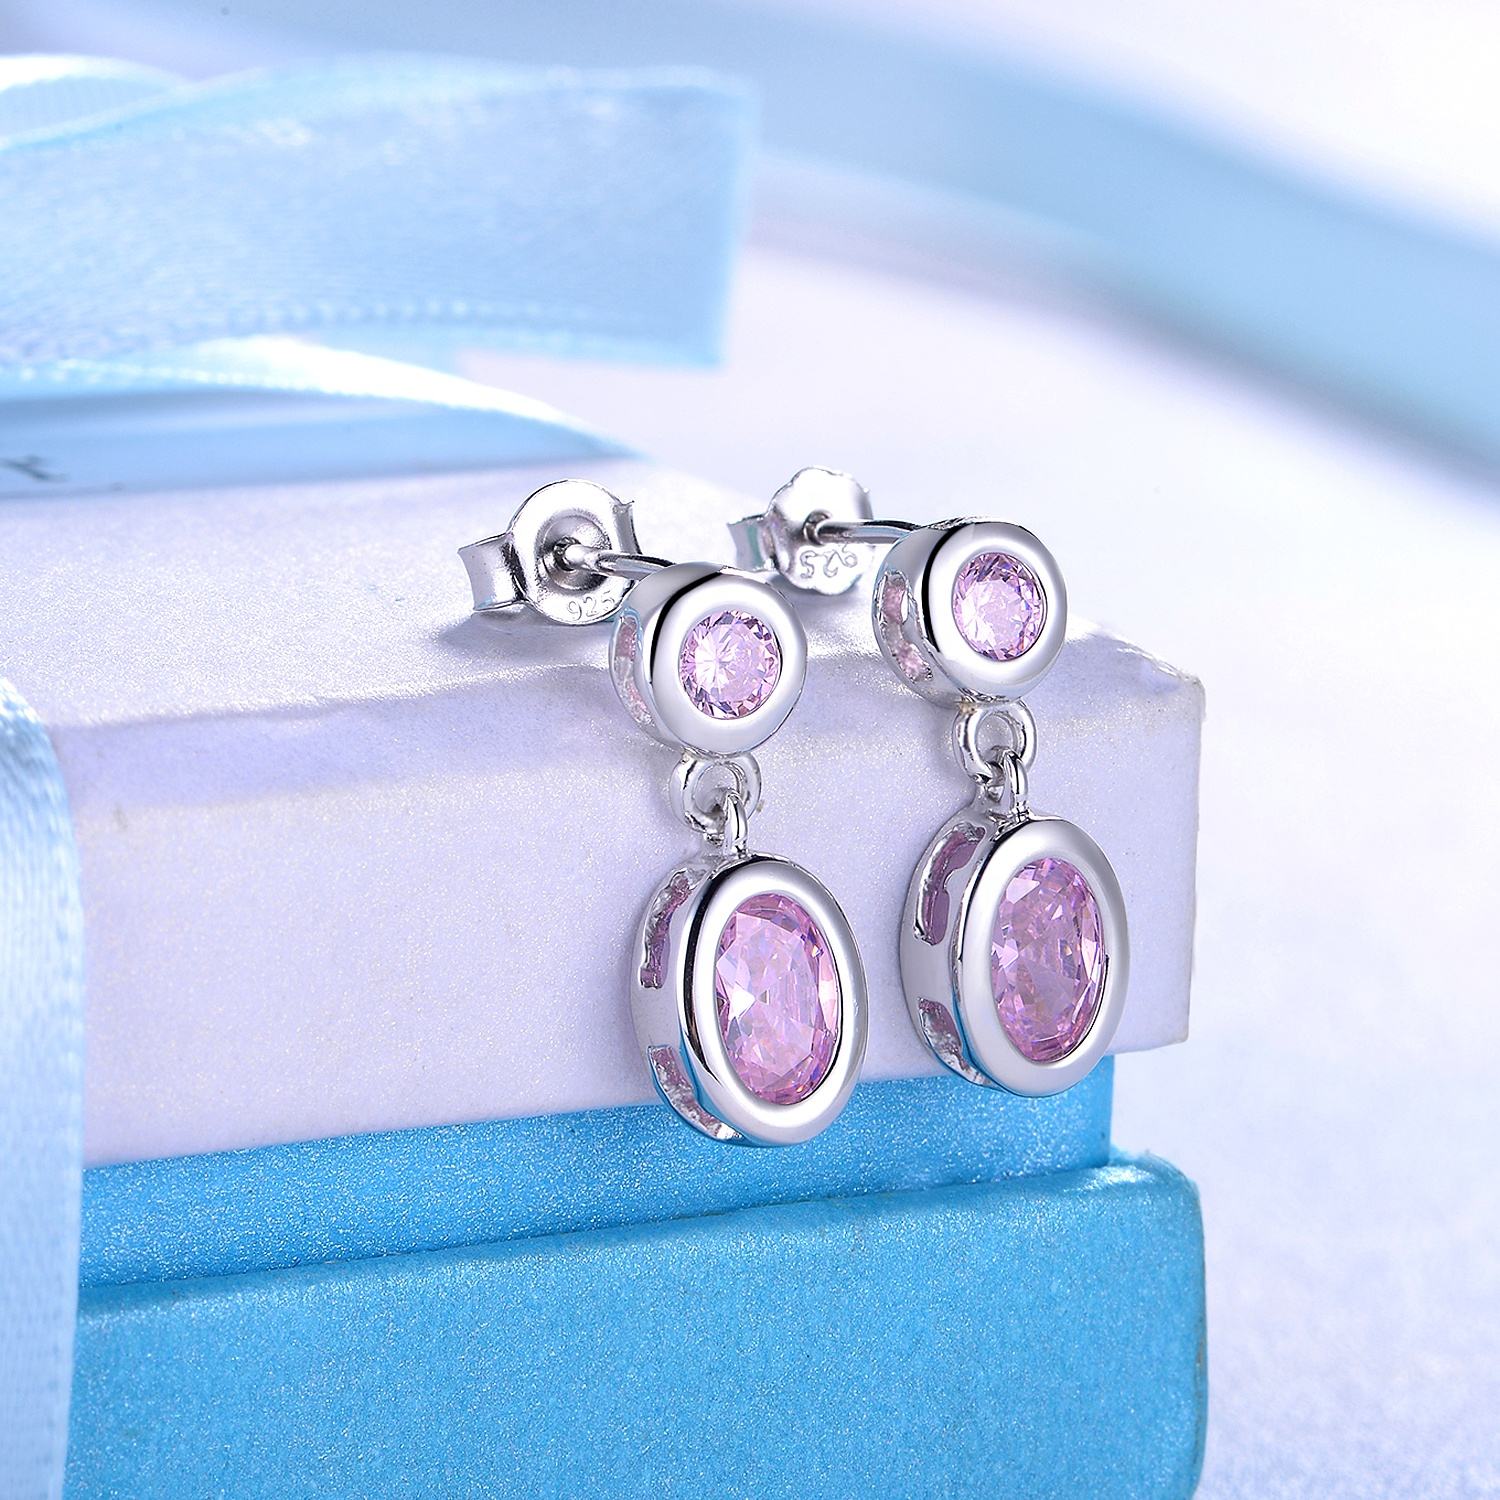 Customize Luxury Jewelry Sets 925 Silver Earrings Necklace Ring Set Pink Cubic Zirconia Jewellery(图5)